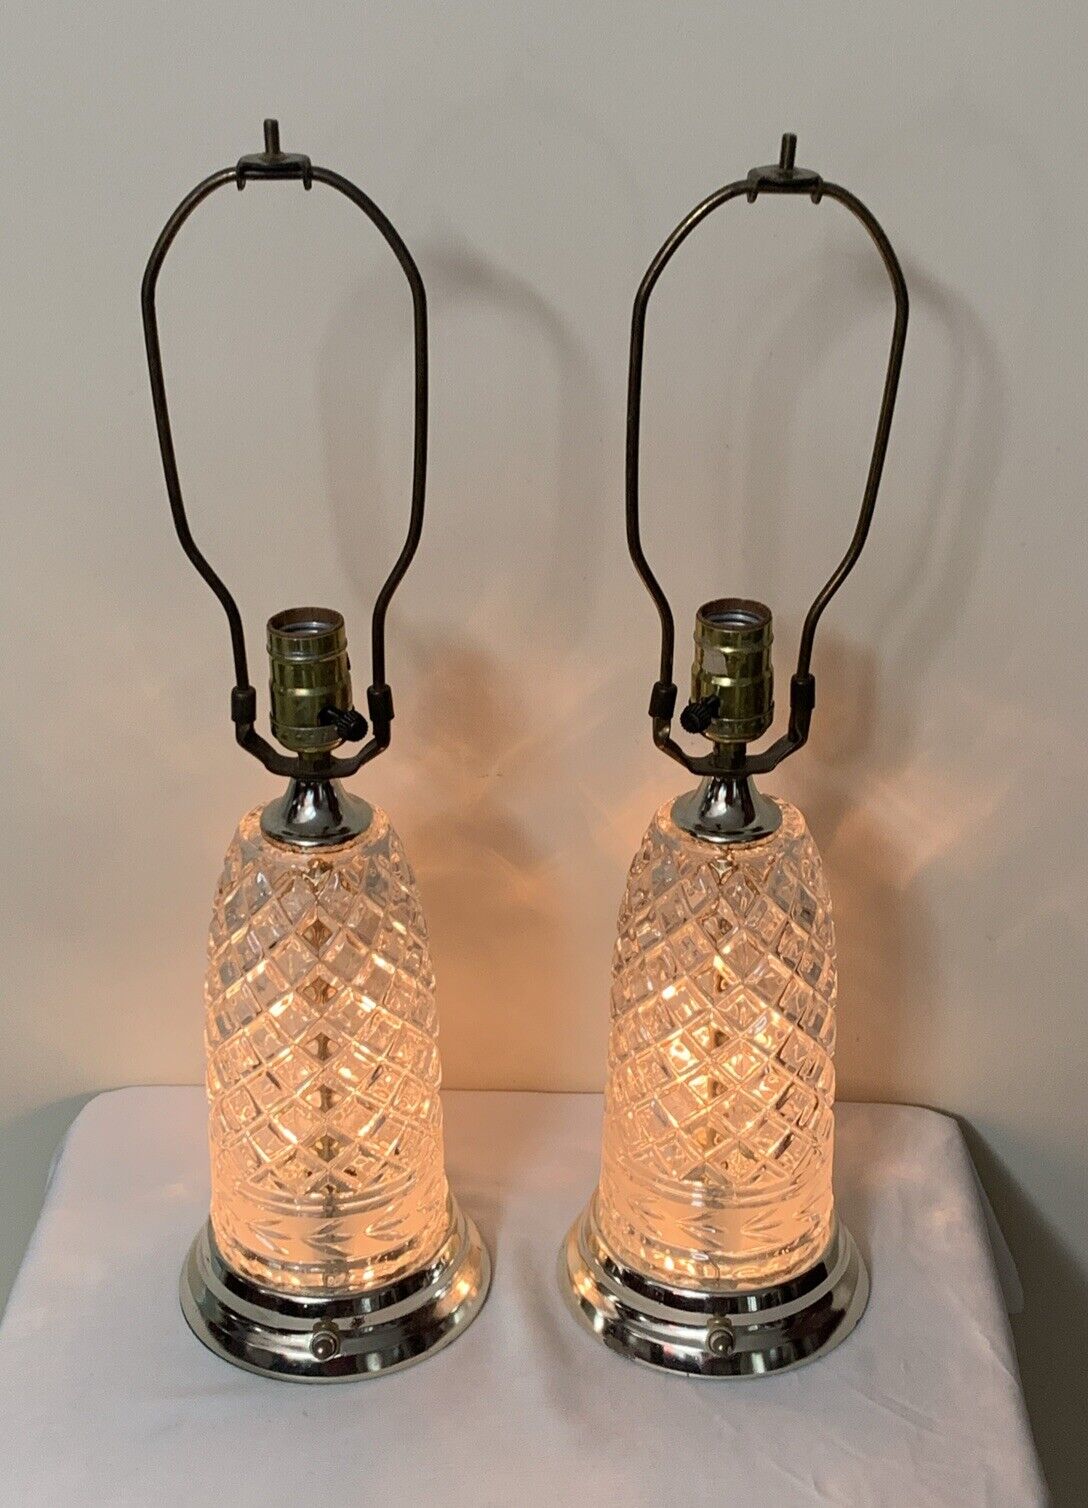 Vintage Set of 2 Cut Crystal Table Lamps w/Interior Night Light and 3 Way Switch